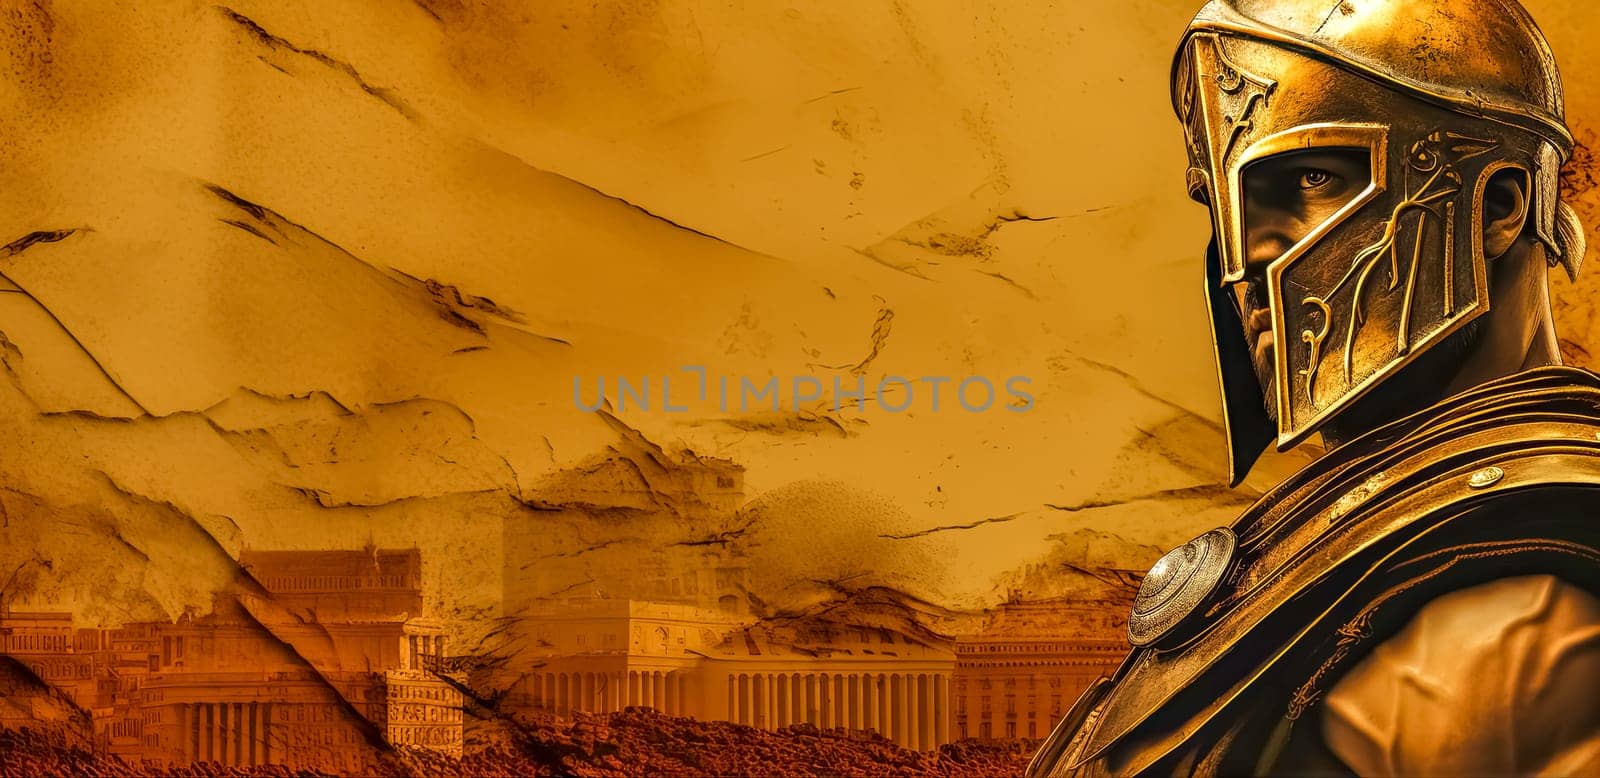 Ancient Spartan Warrior Helmet and Armor with Historical Architecture Background by Edophoto